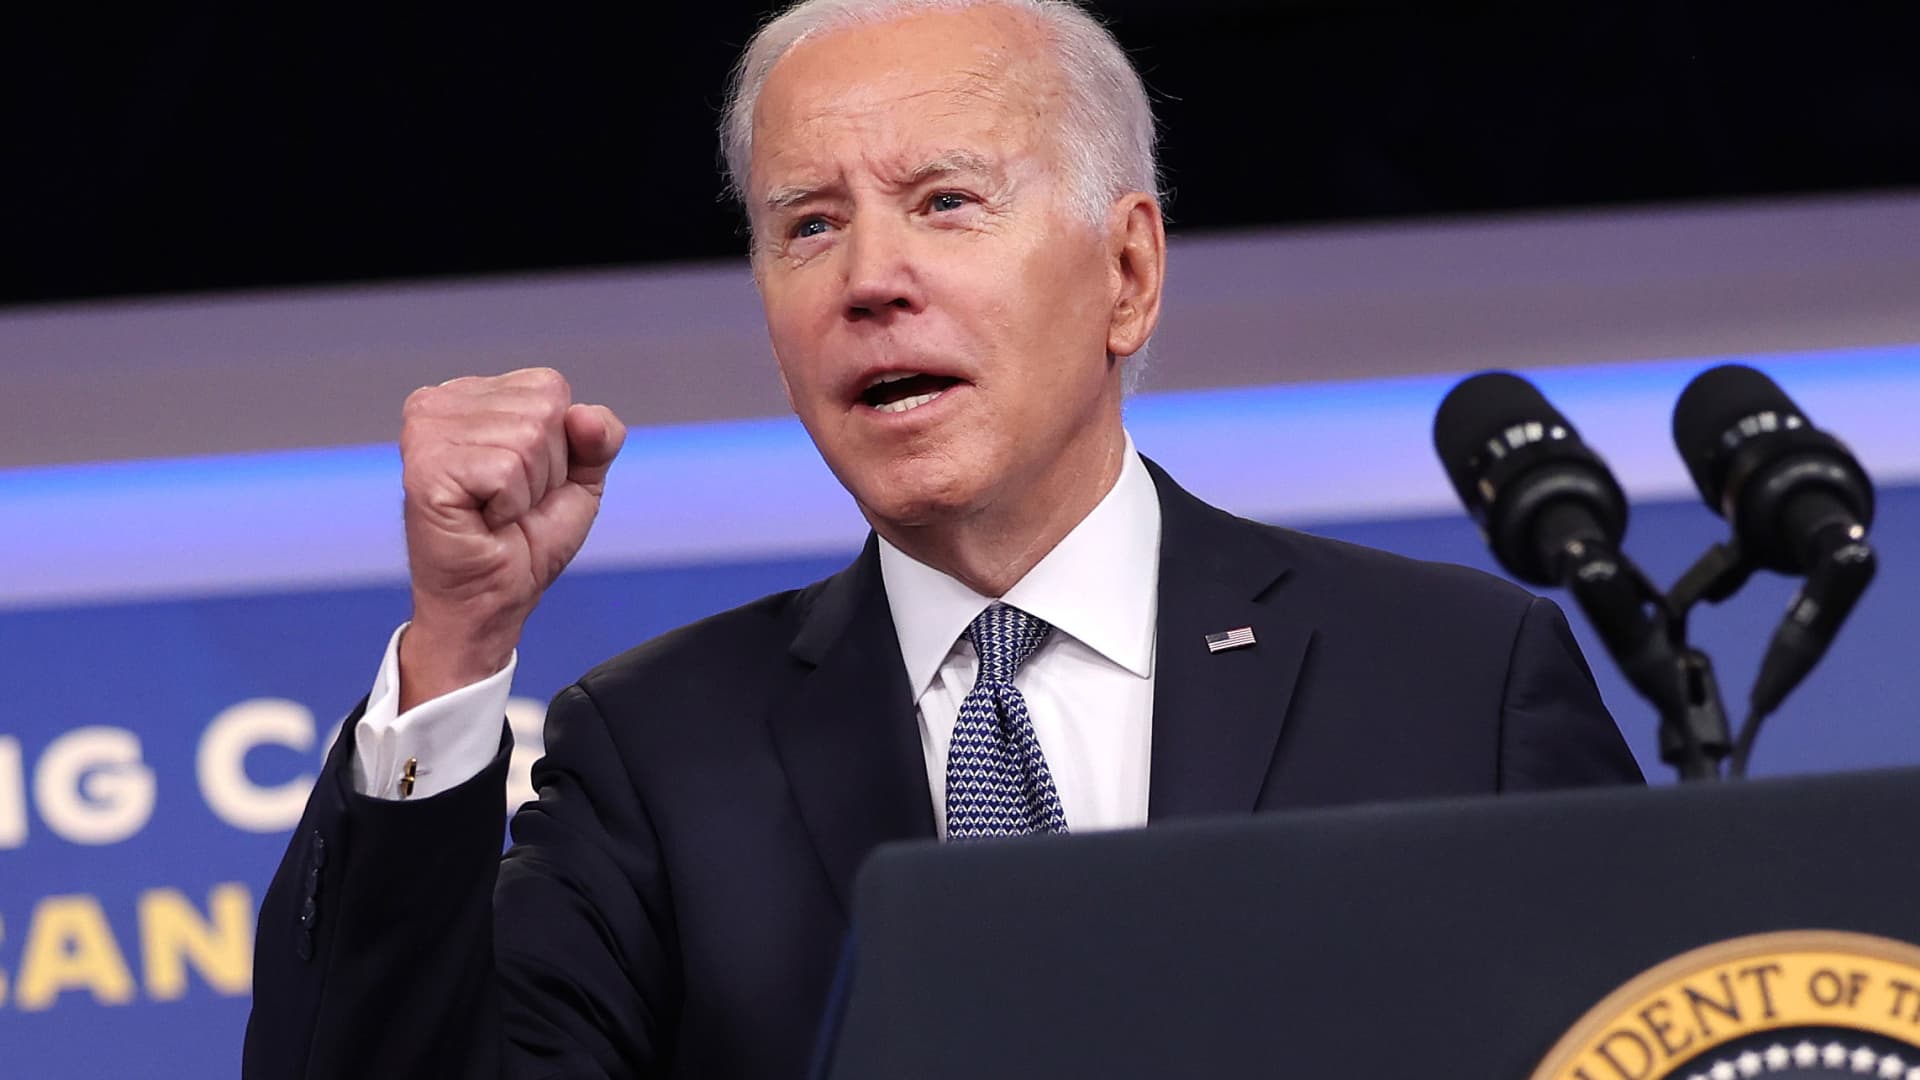 Biden's stock buyback tax isn't working. In State of the Union, he's asking Congress for more